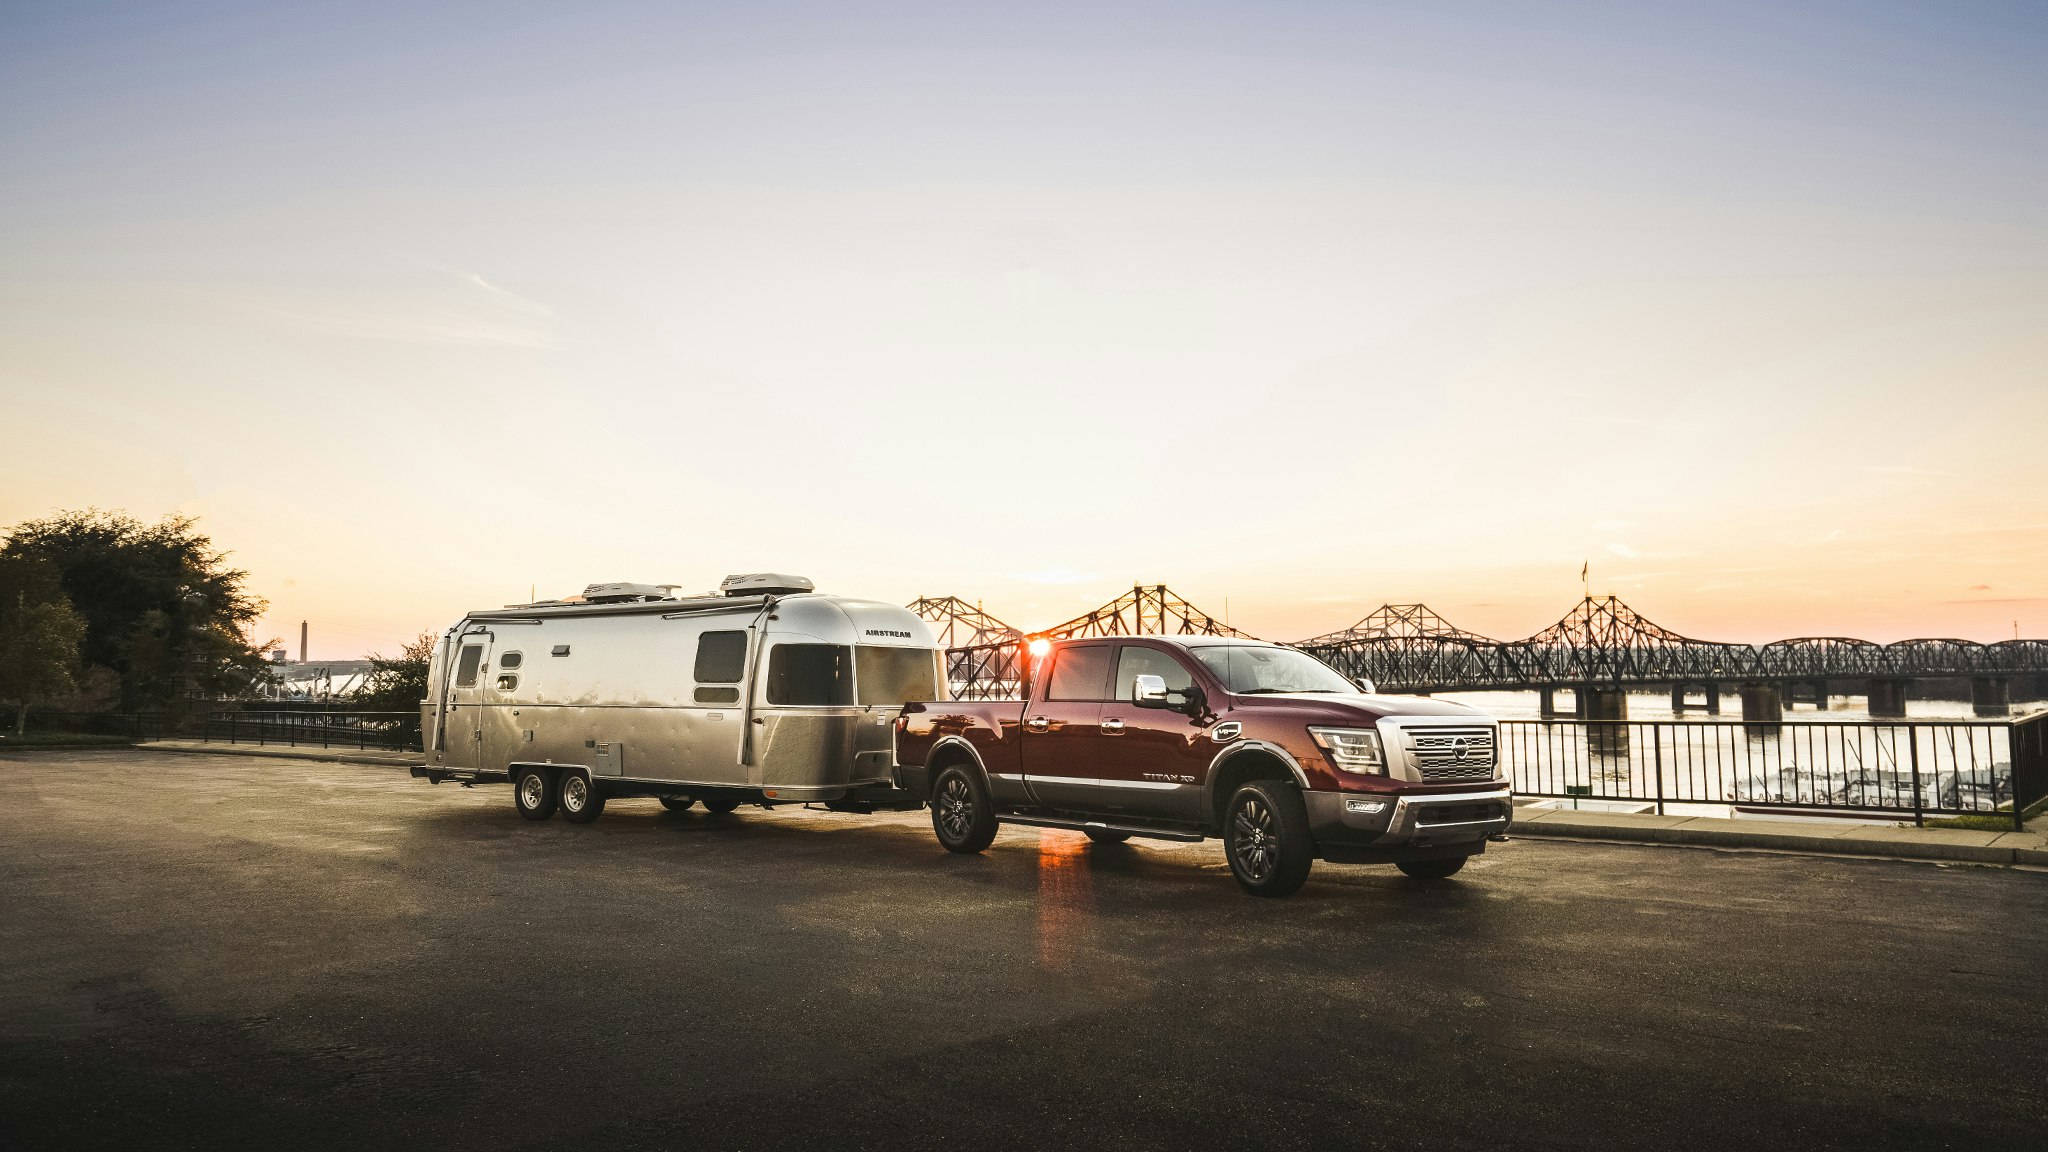 Finding the Perfect Tow Vehicle to Pull an Airstream - Airstream